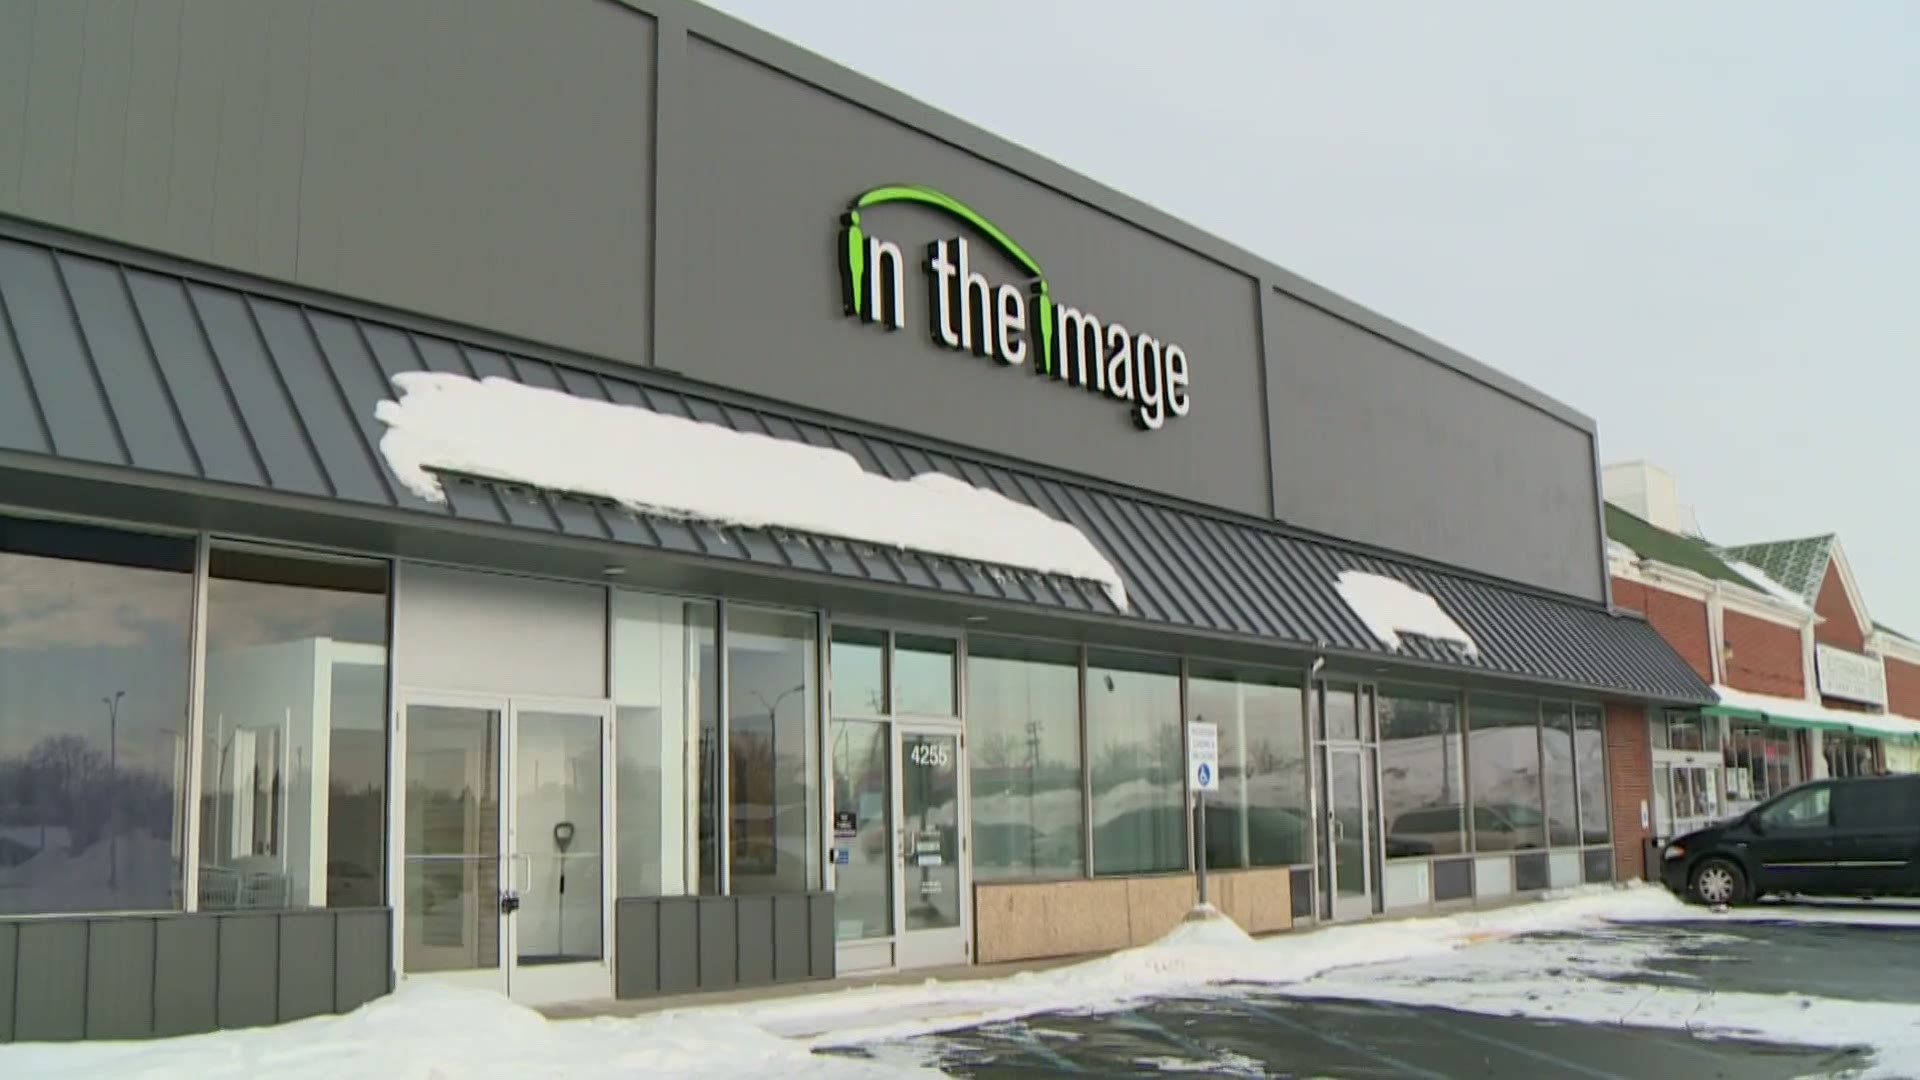 After serving the Heartside community for the past two decades, "In The Image" is moving. Here's a look at where the nonprofit plans to carry out its mission.